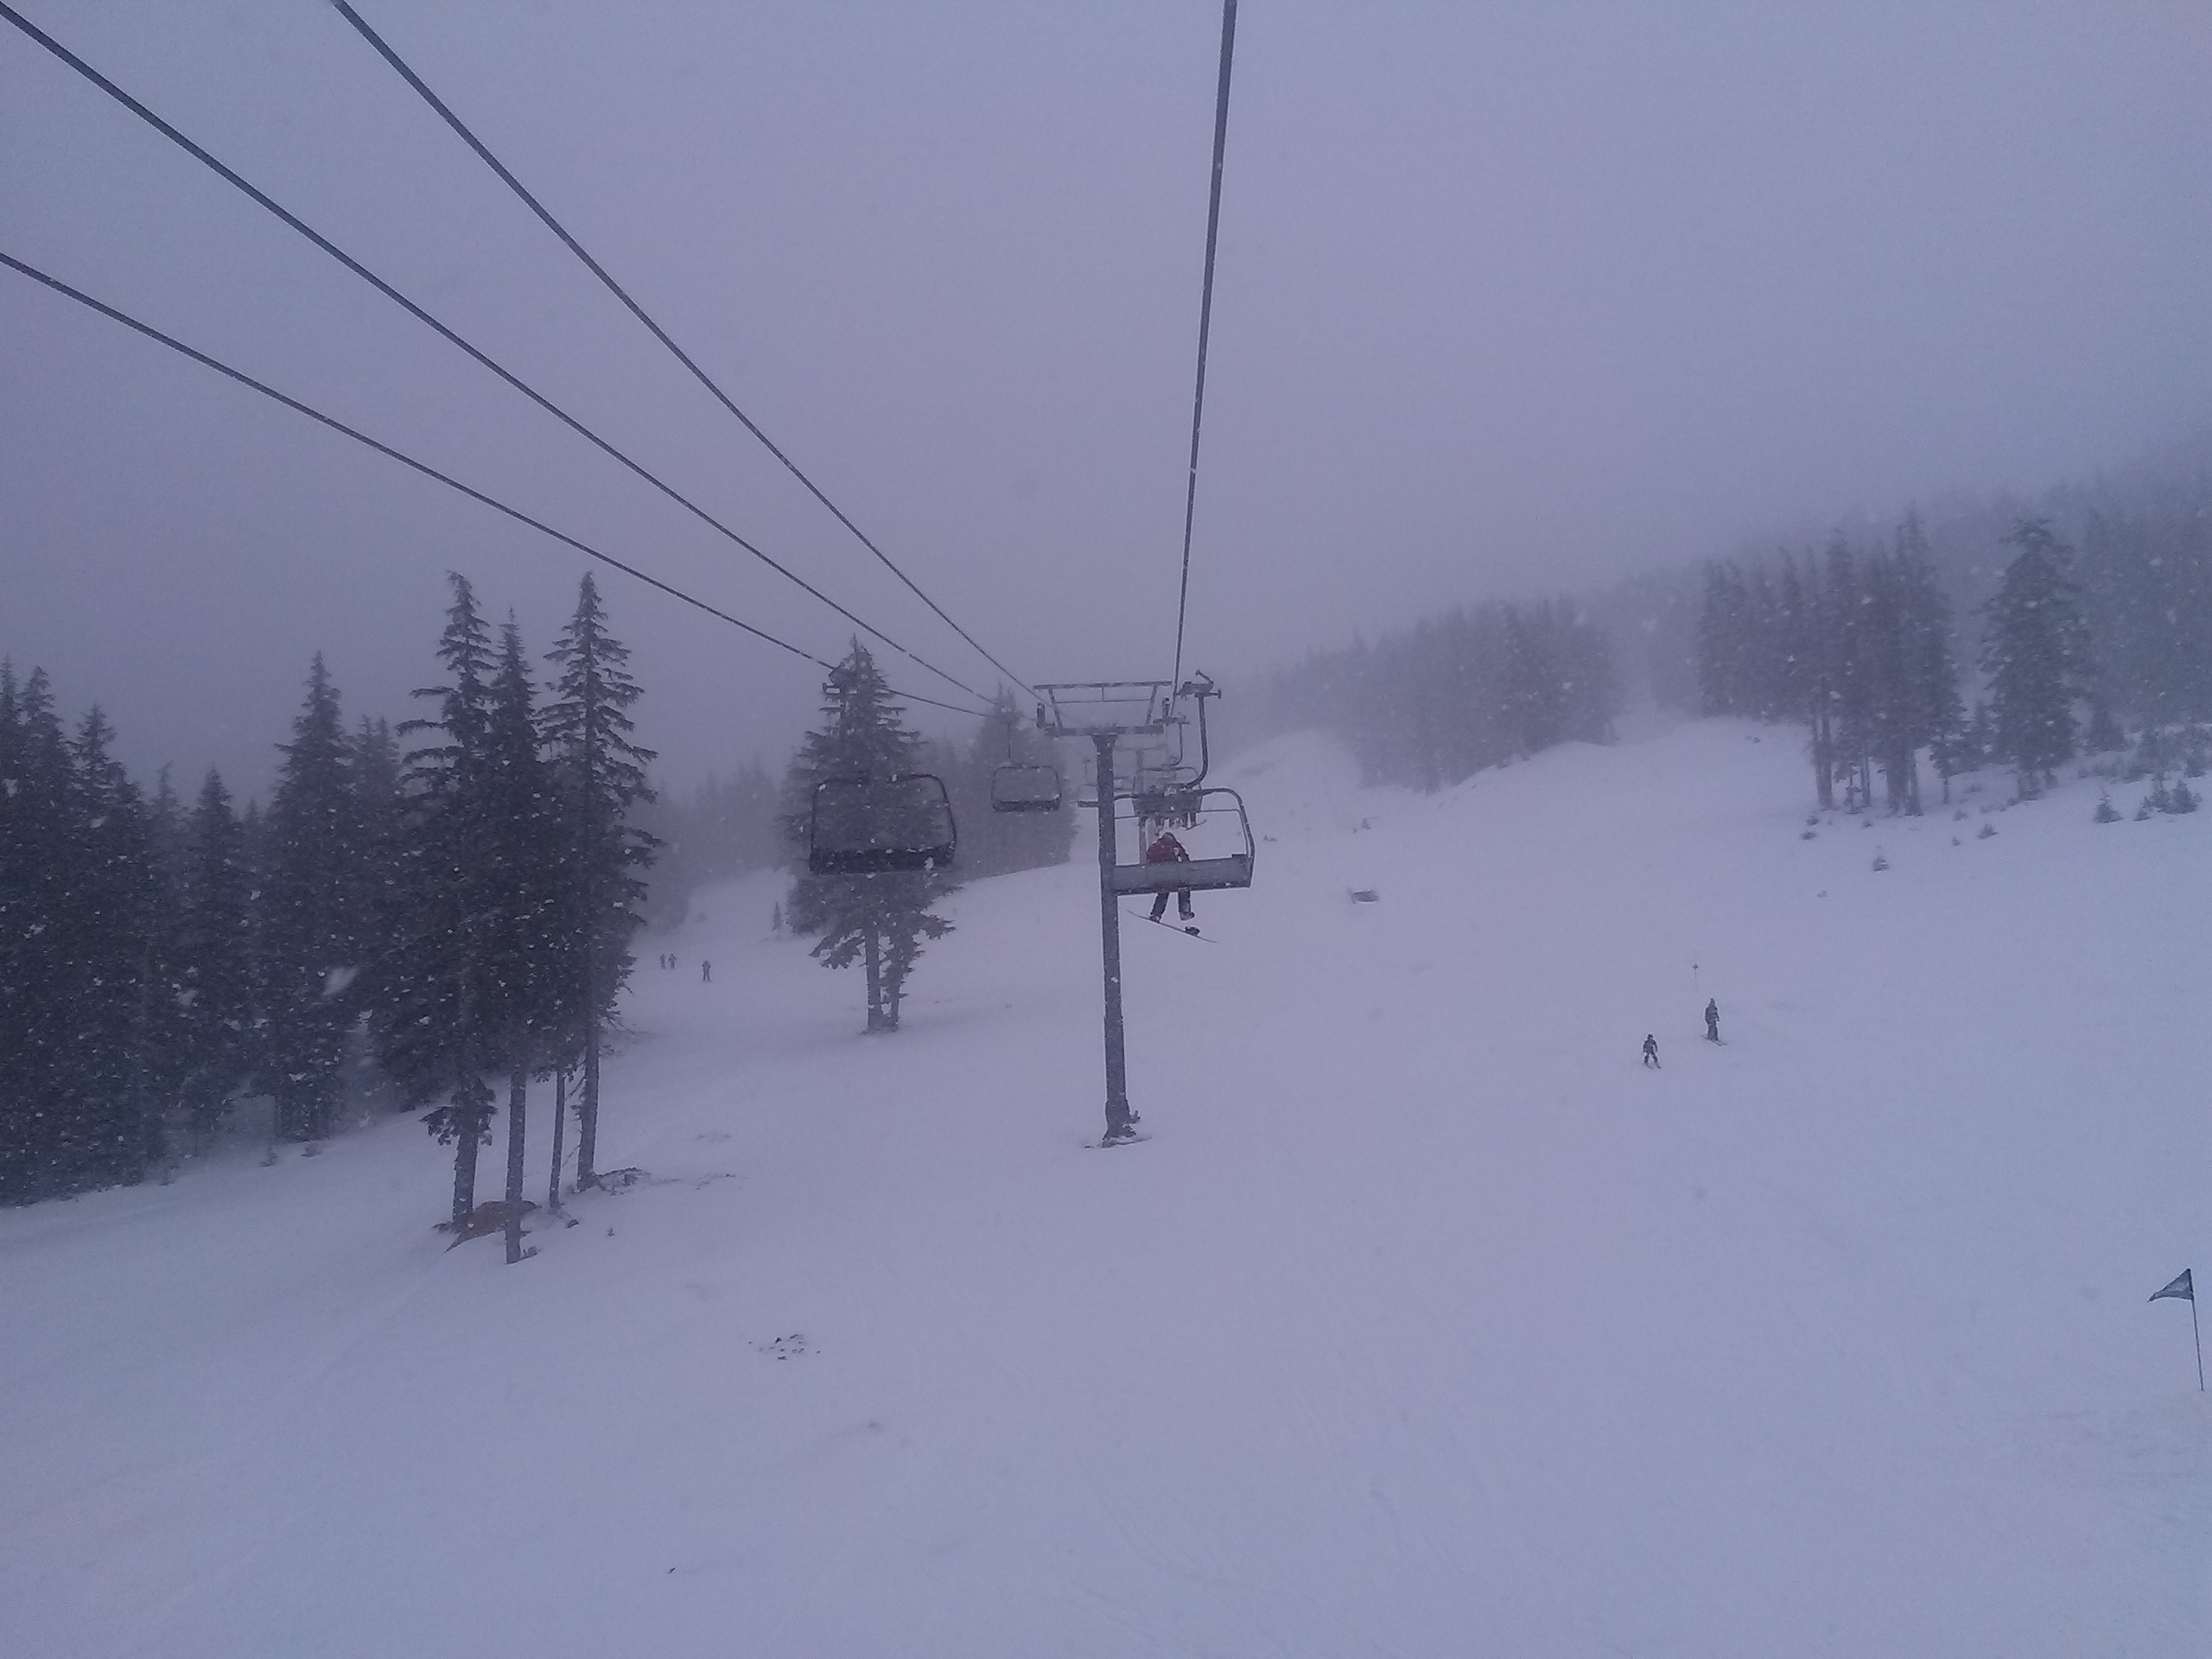 Snowing HARD today!